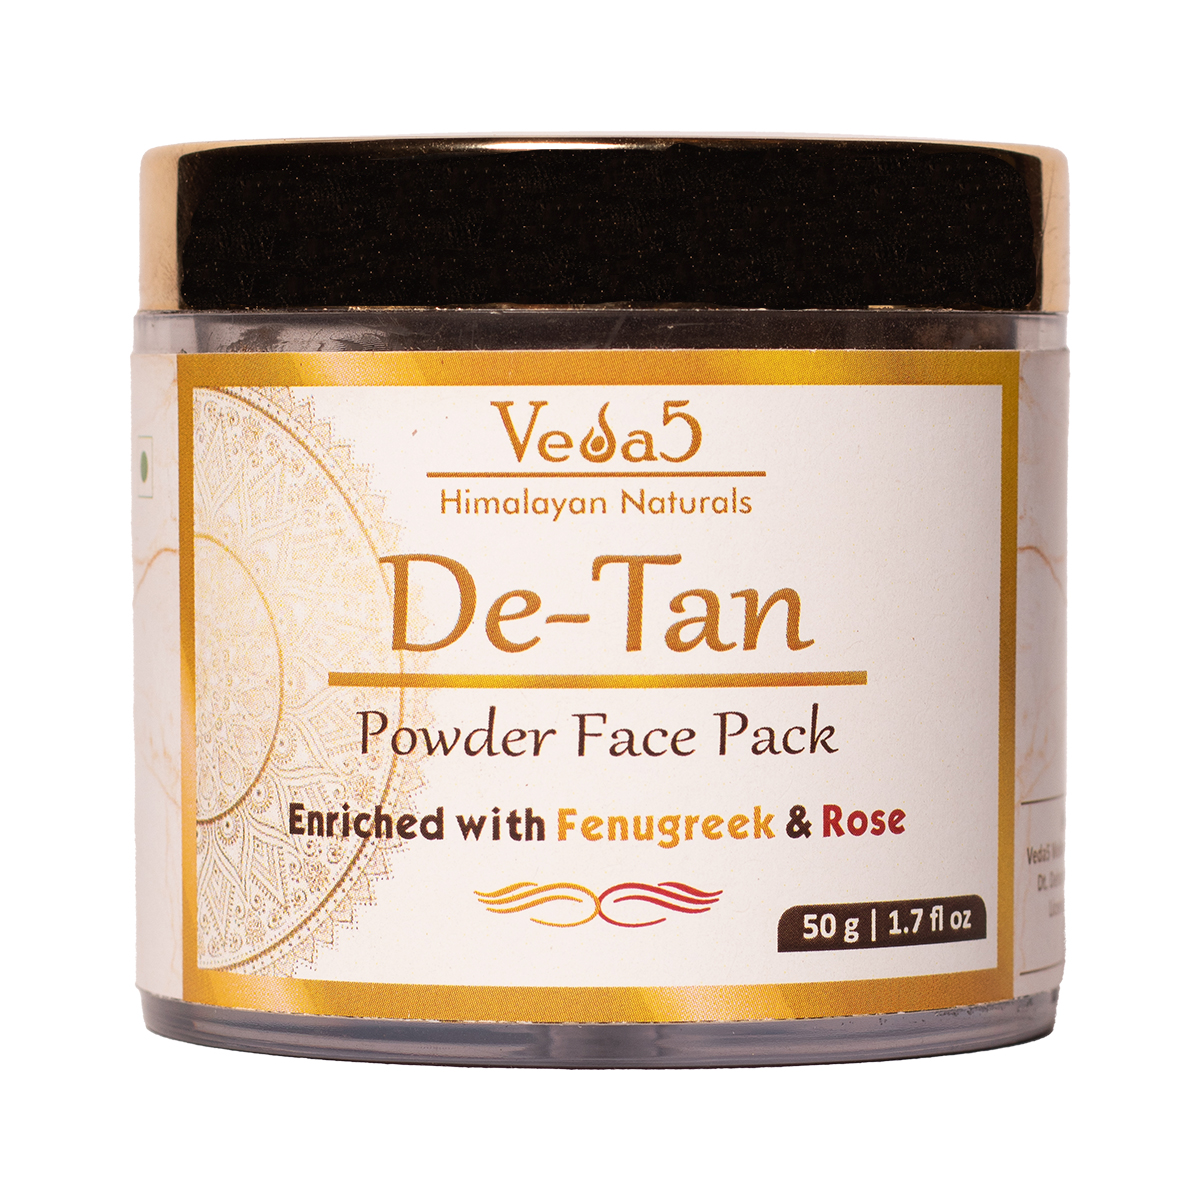 De Tan Powder Face Pack Enriched with Fenugreek and Rose by Veda5 Himalayan Naturals 1